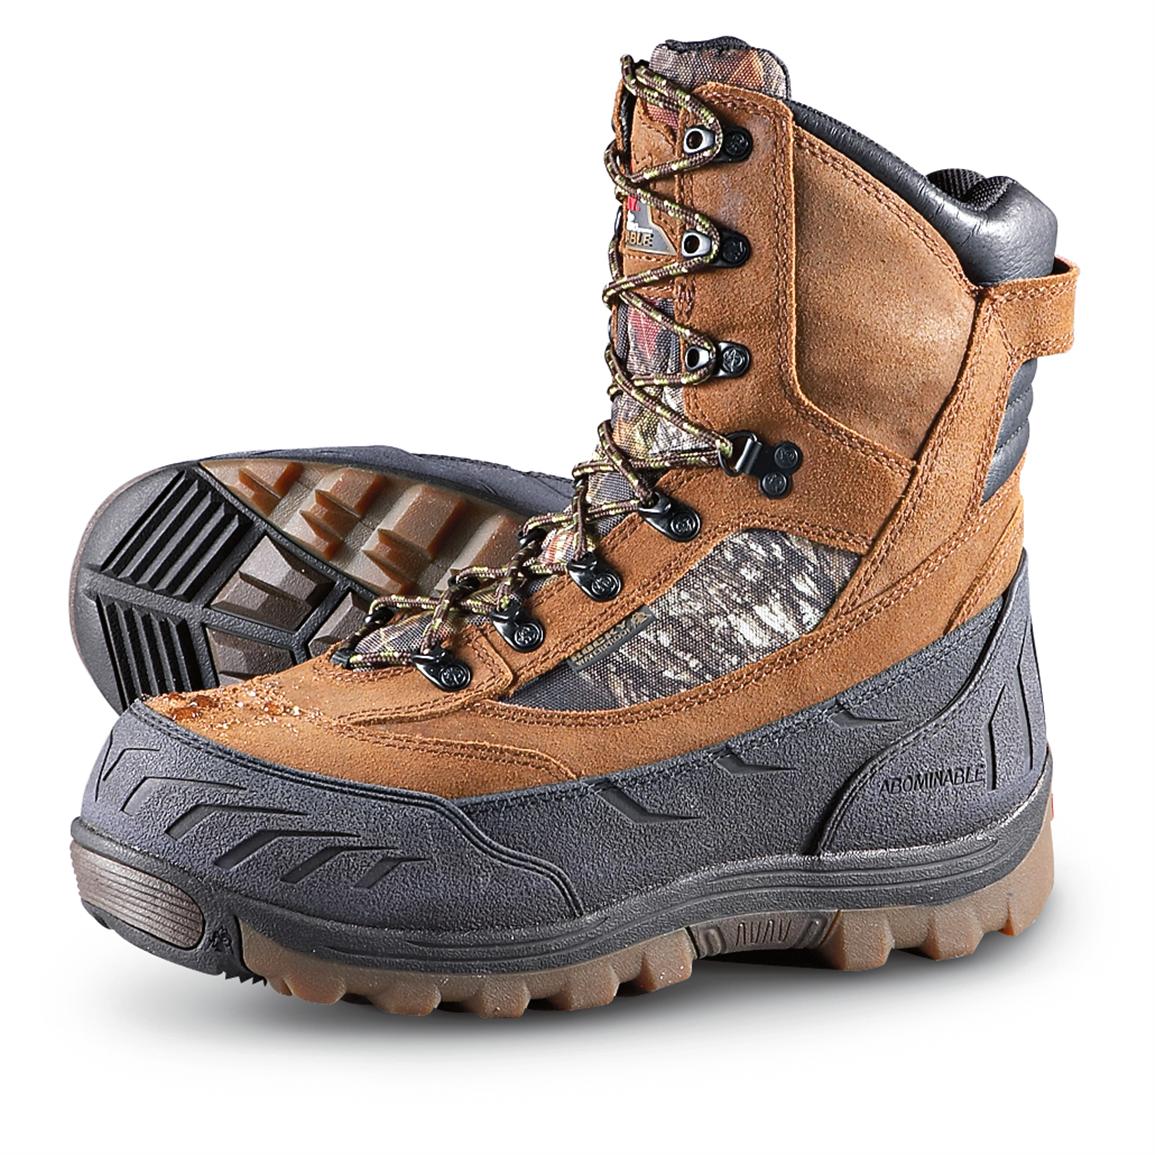 1g thinsulate work boots,Save up to 16%,www.ilcascinone.com